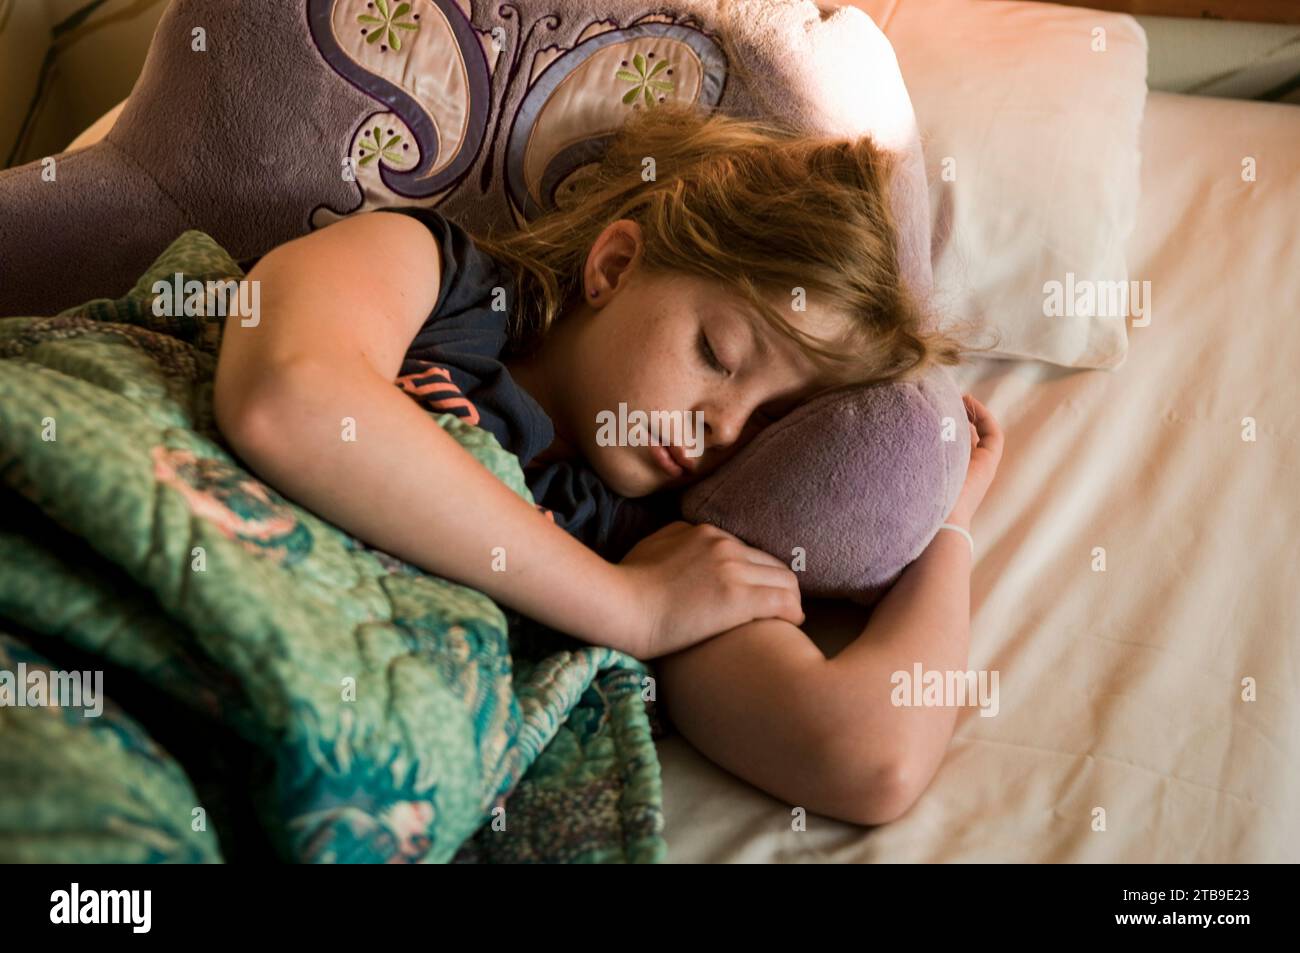 Girl asleep in her bed; Stone Harbor, New Jersey, United States of America Stock Photo